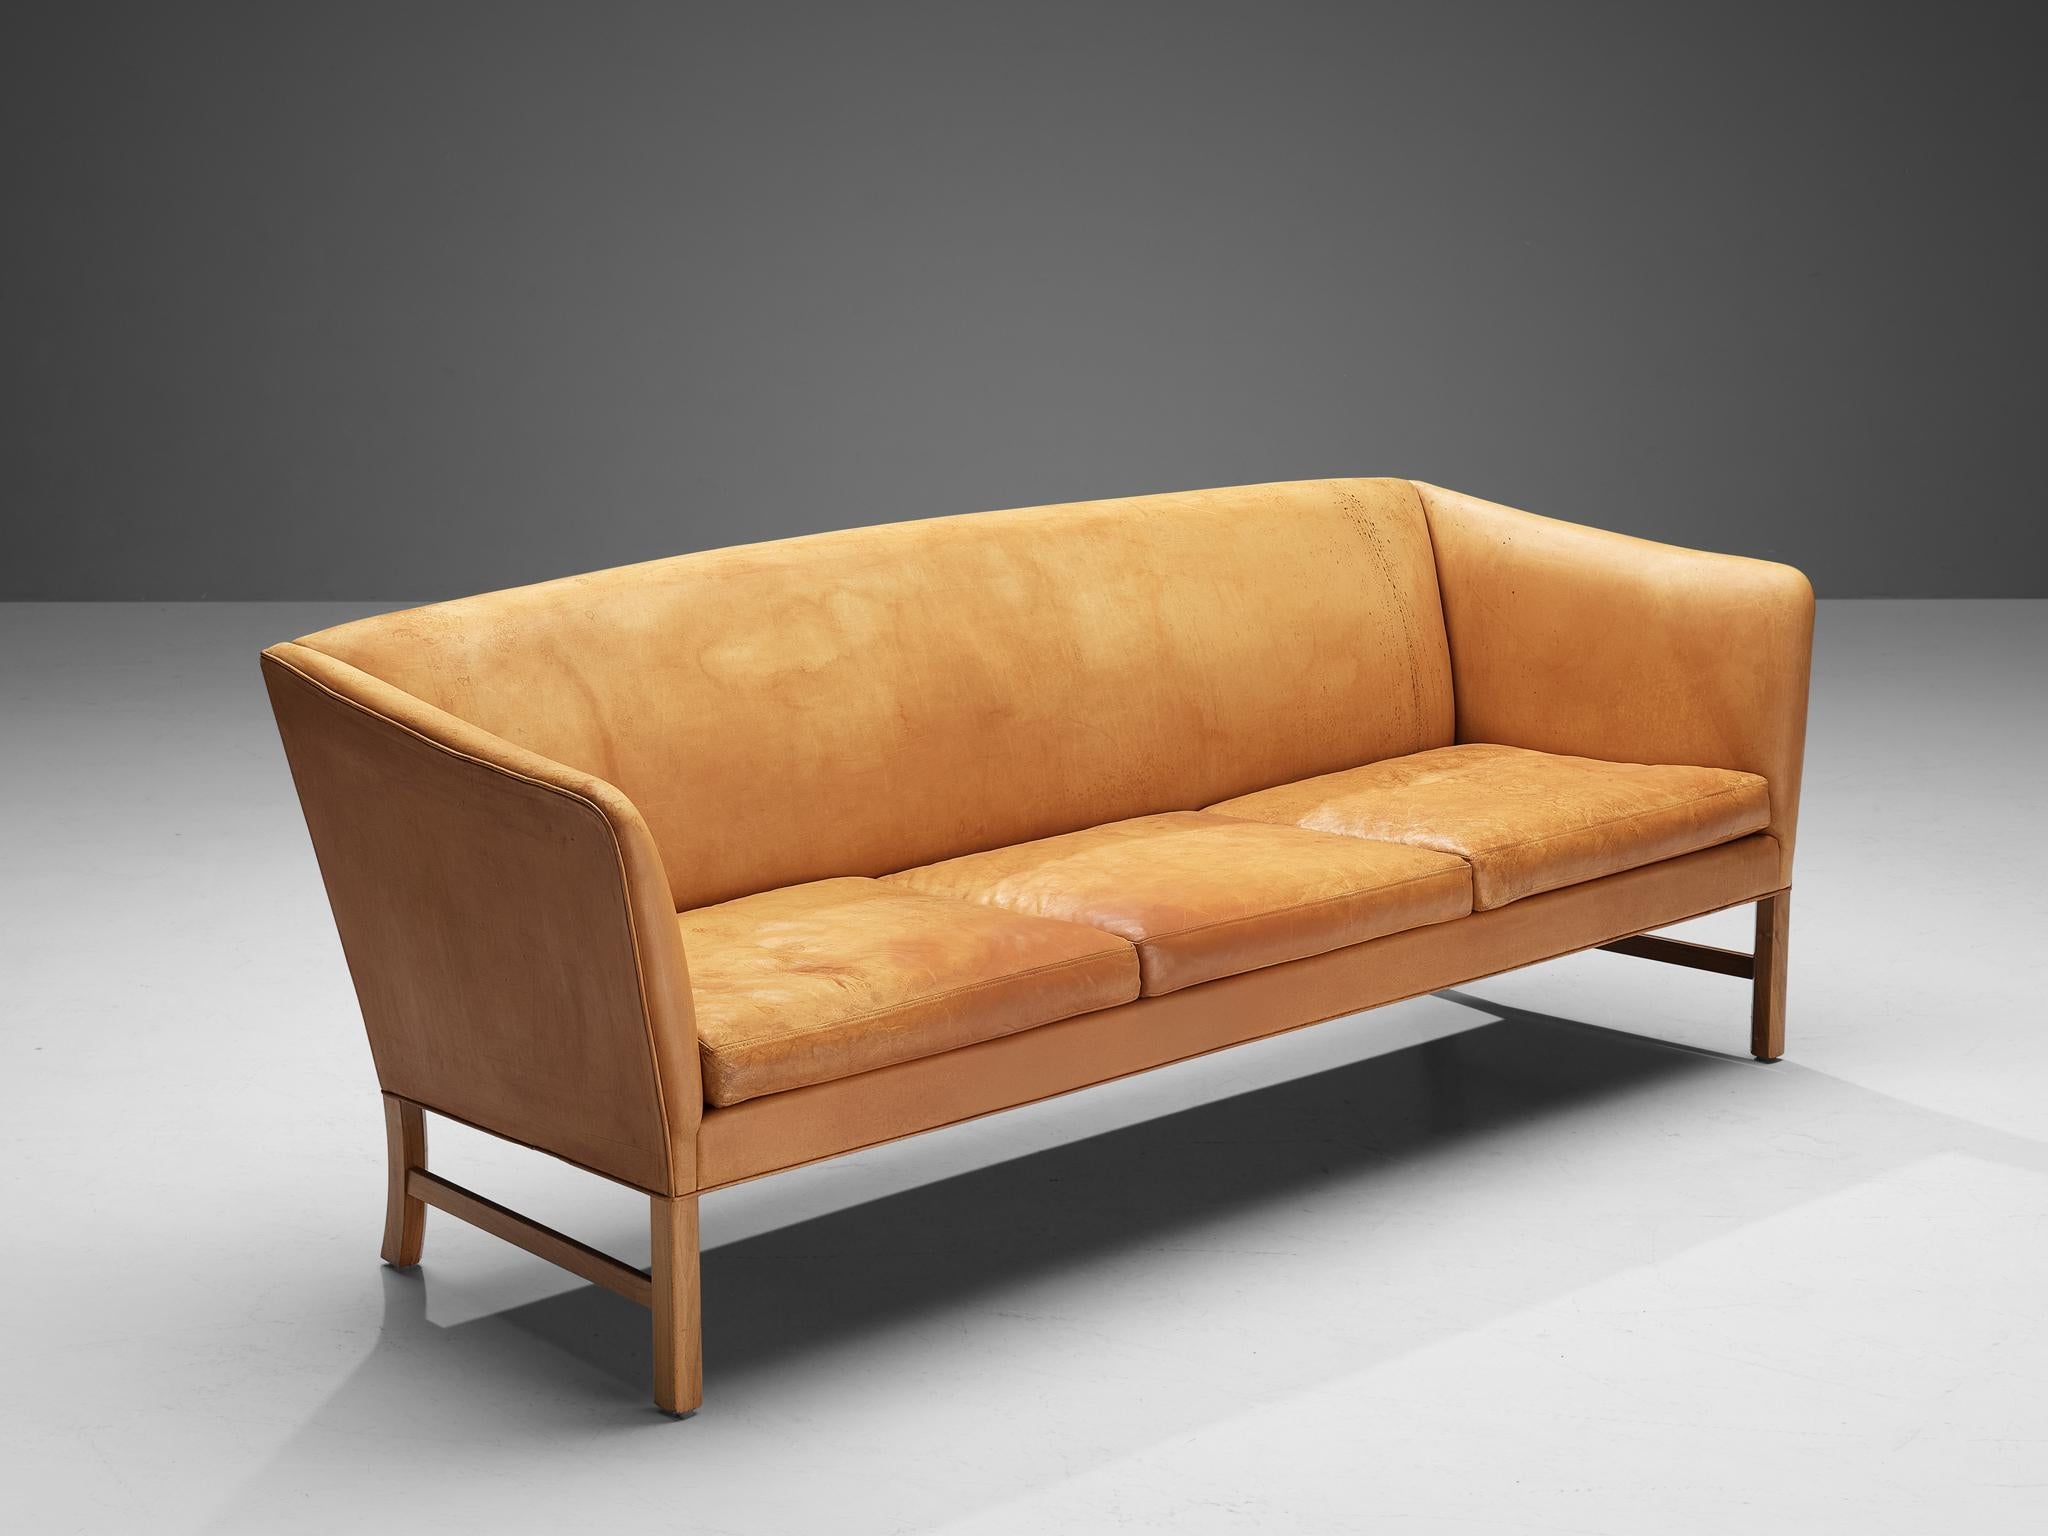 Ole Wanscher for A.J. Iverseren Sofa in Camel Leather and Walnut